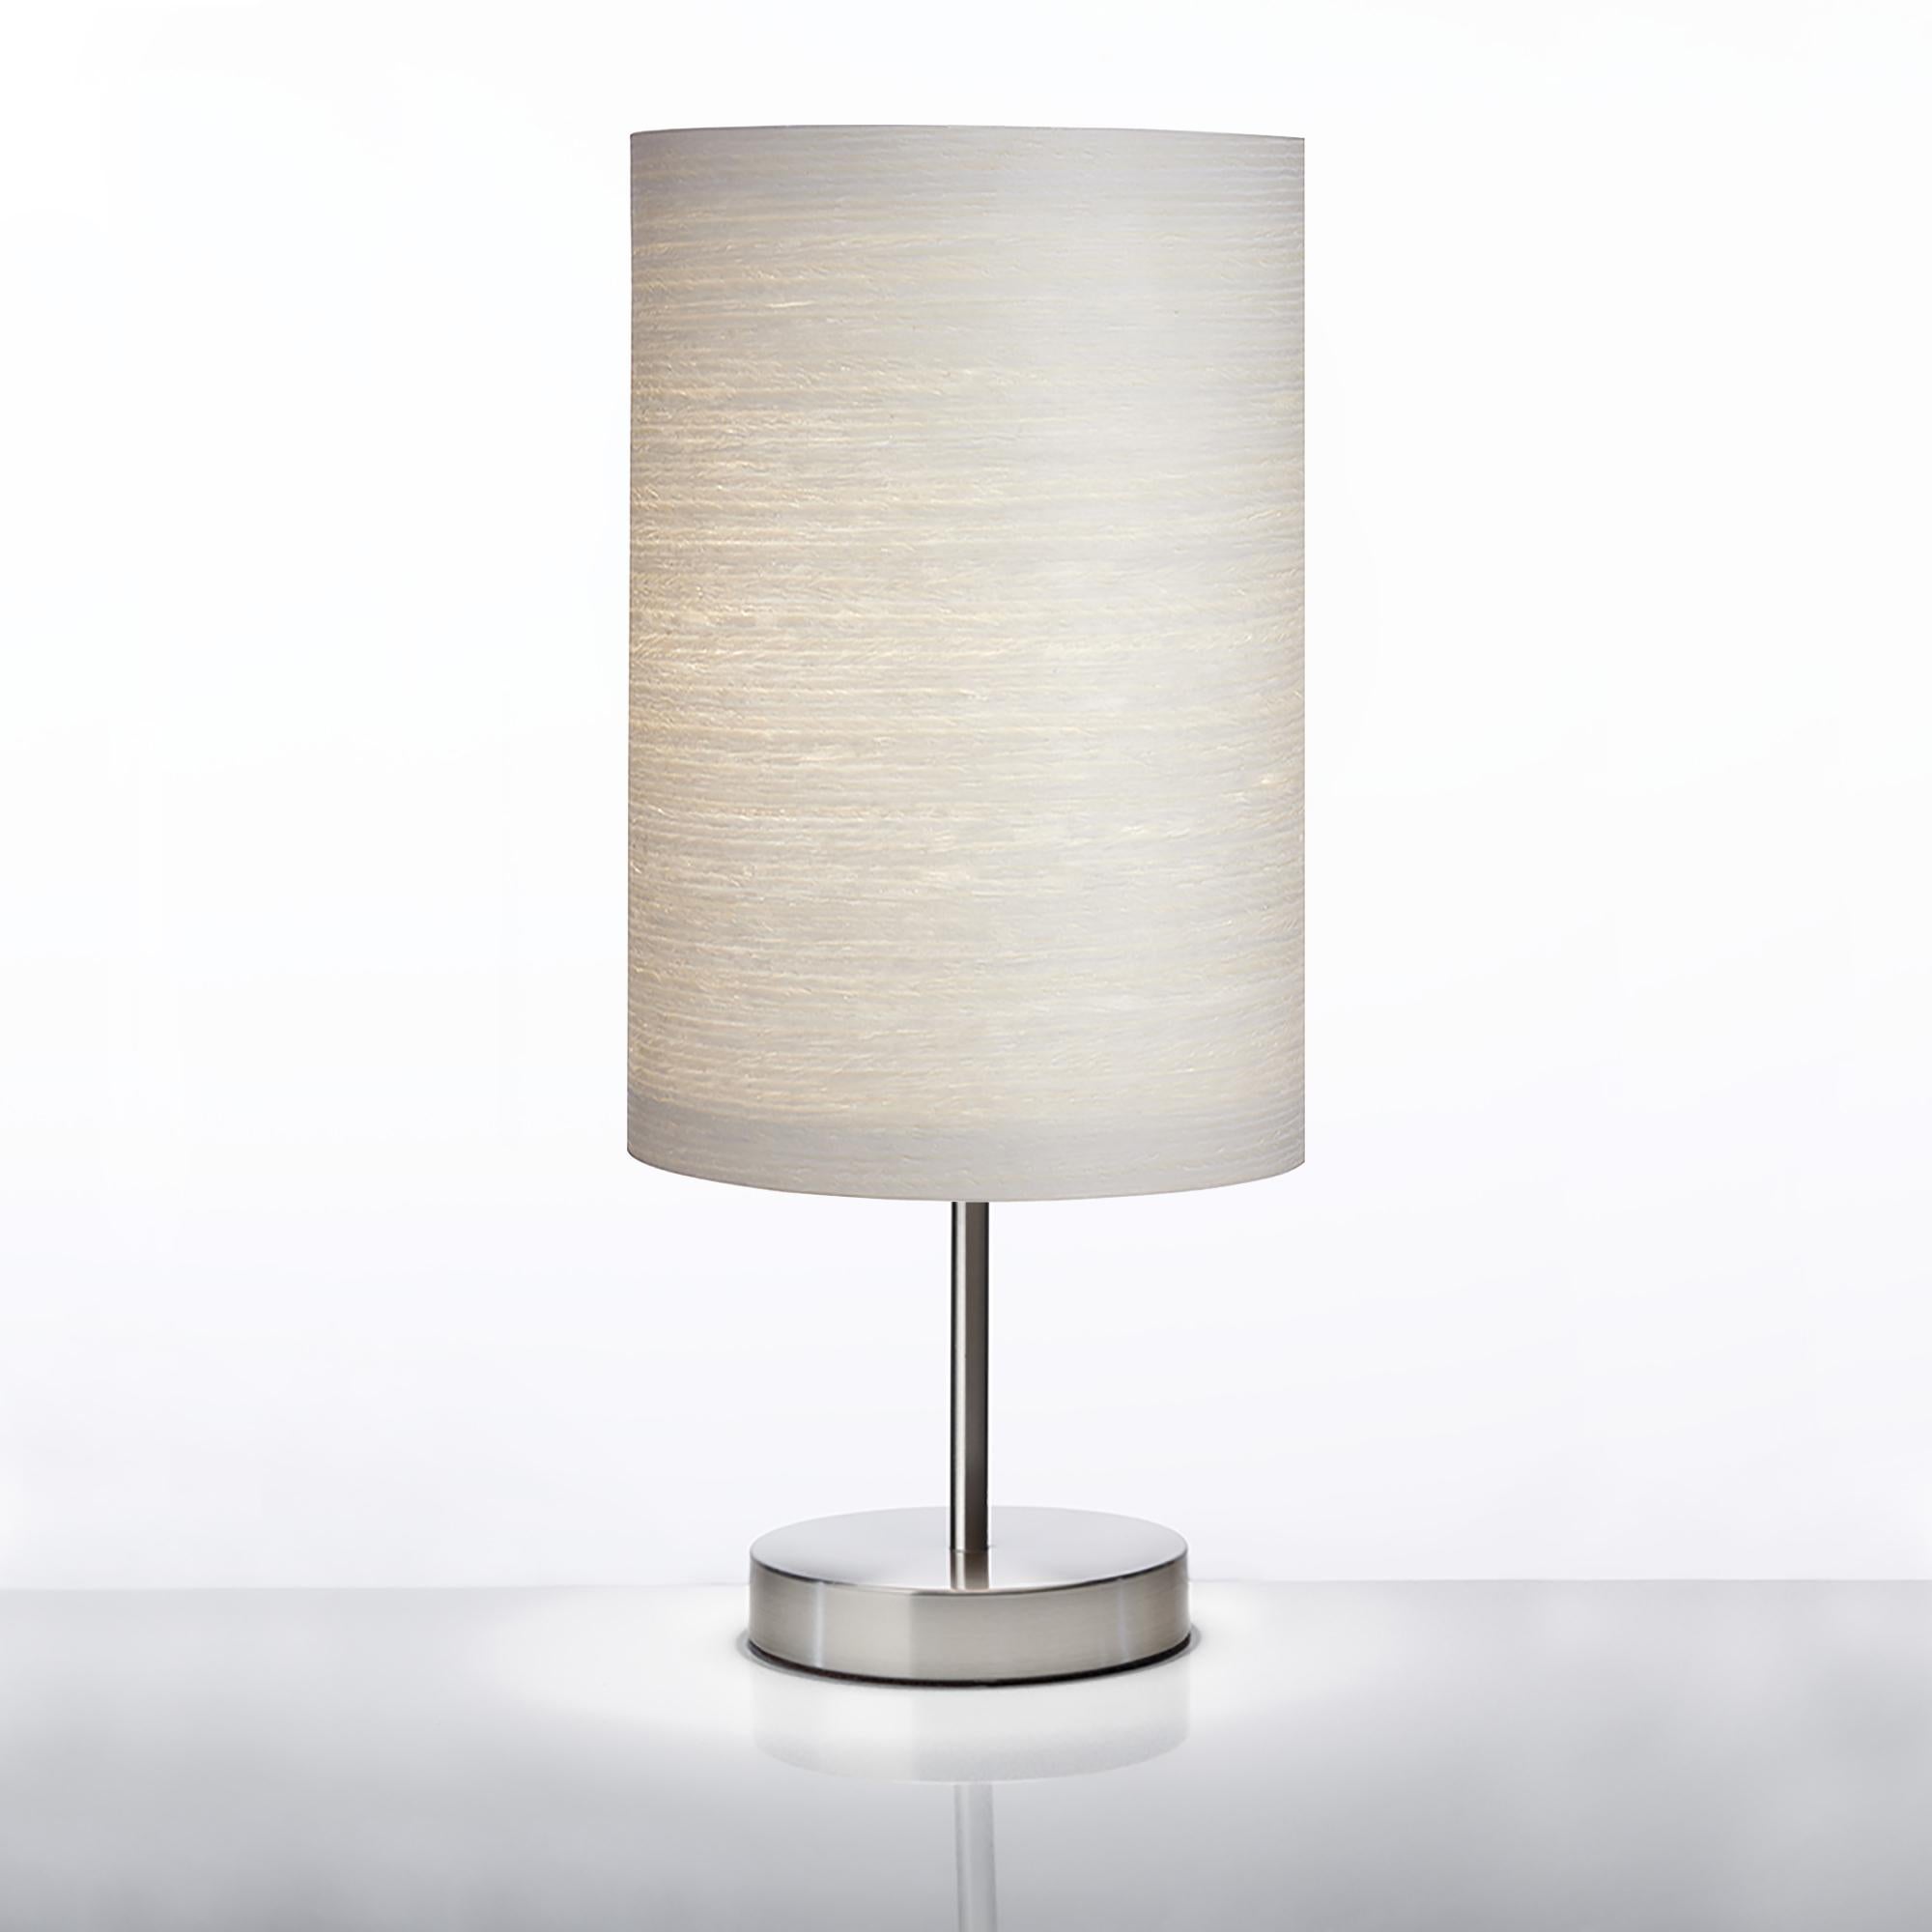 SERRET is a Danish Modern wood veneer side light. This small contemporary table lamp can be used as a luxury piece for a bar, side table, alcove, or as bedside lighting. This Organic, Scandinavian Design is customized with several wood veneer